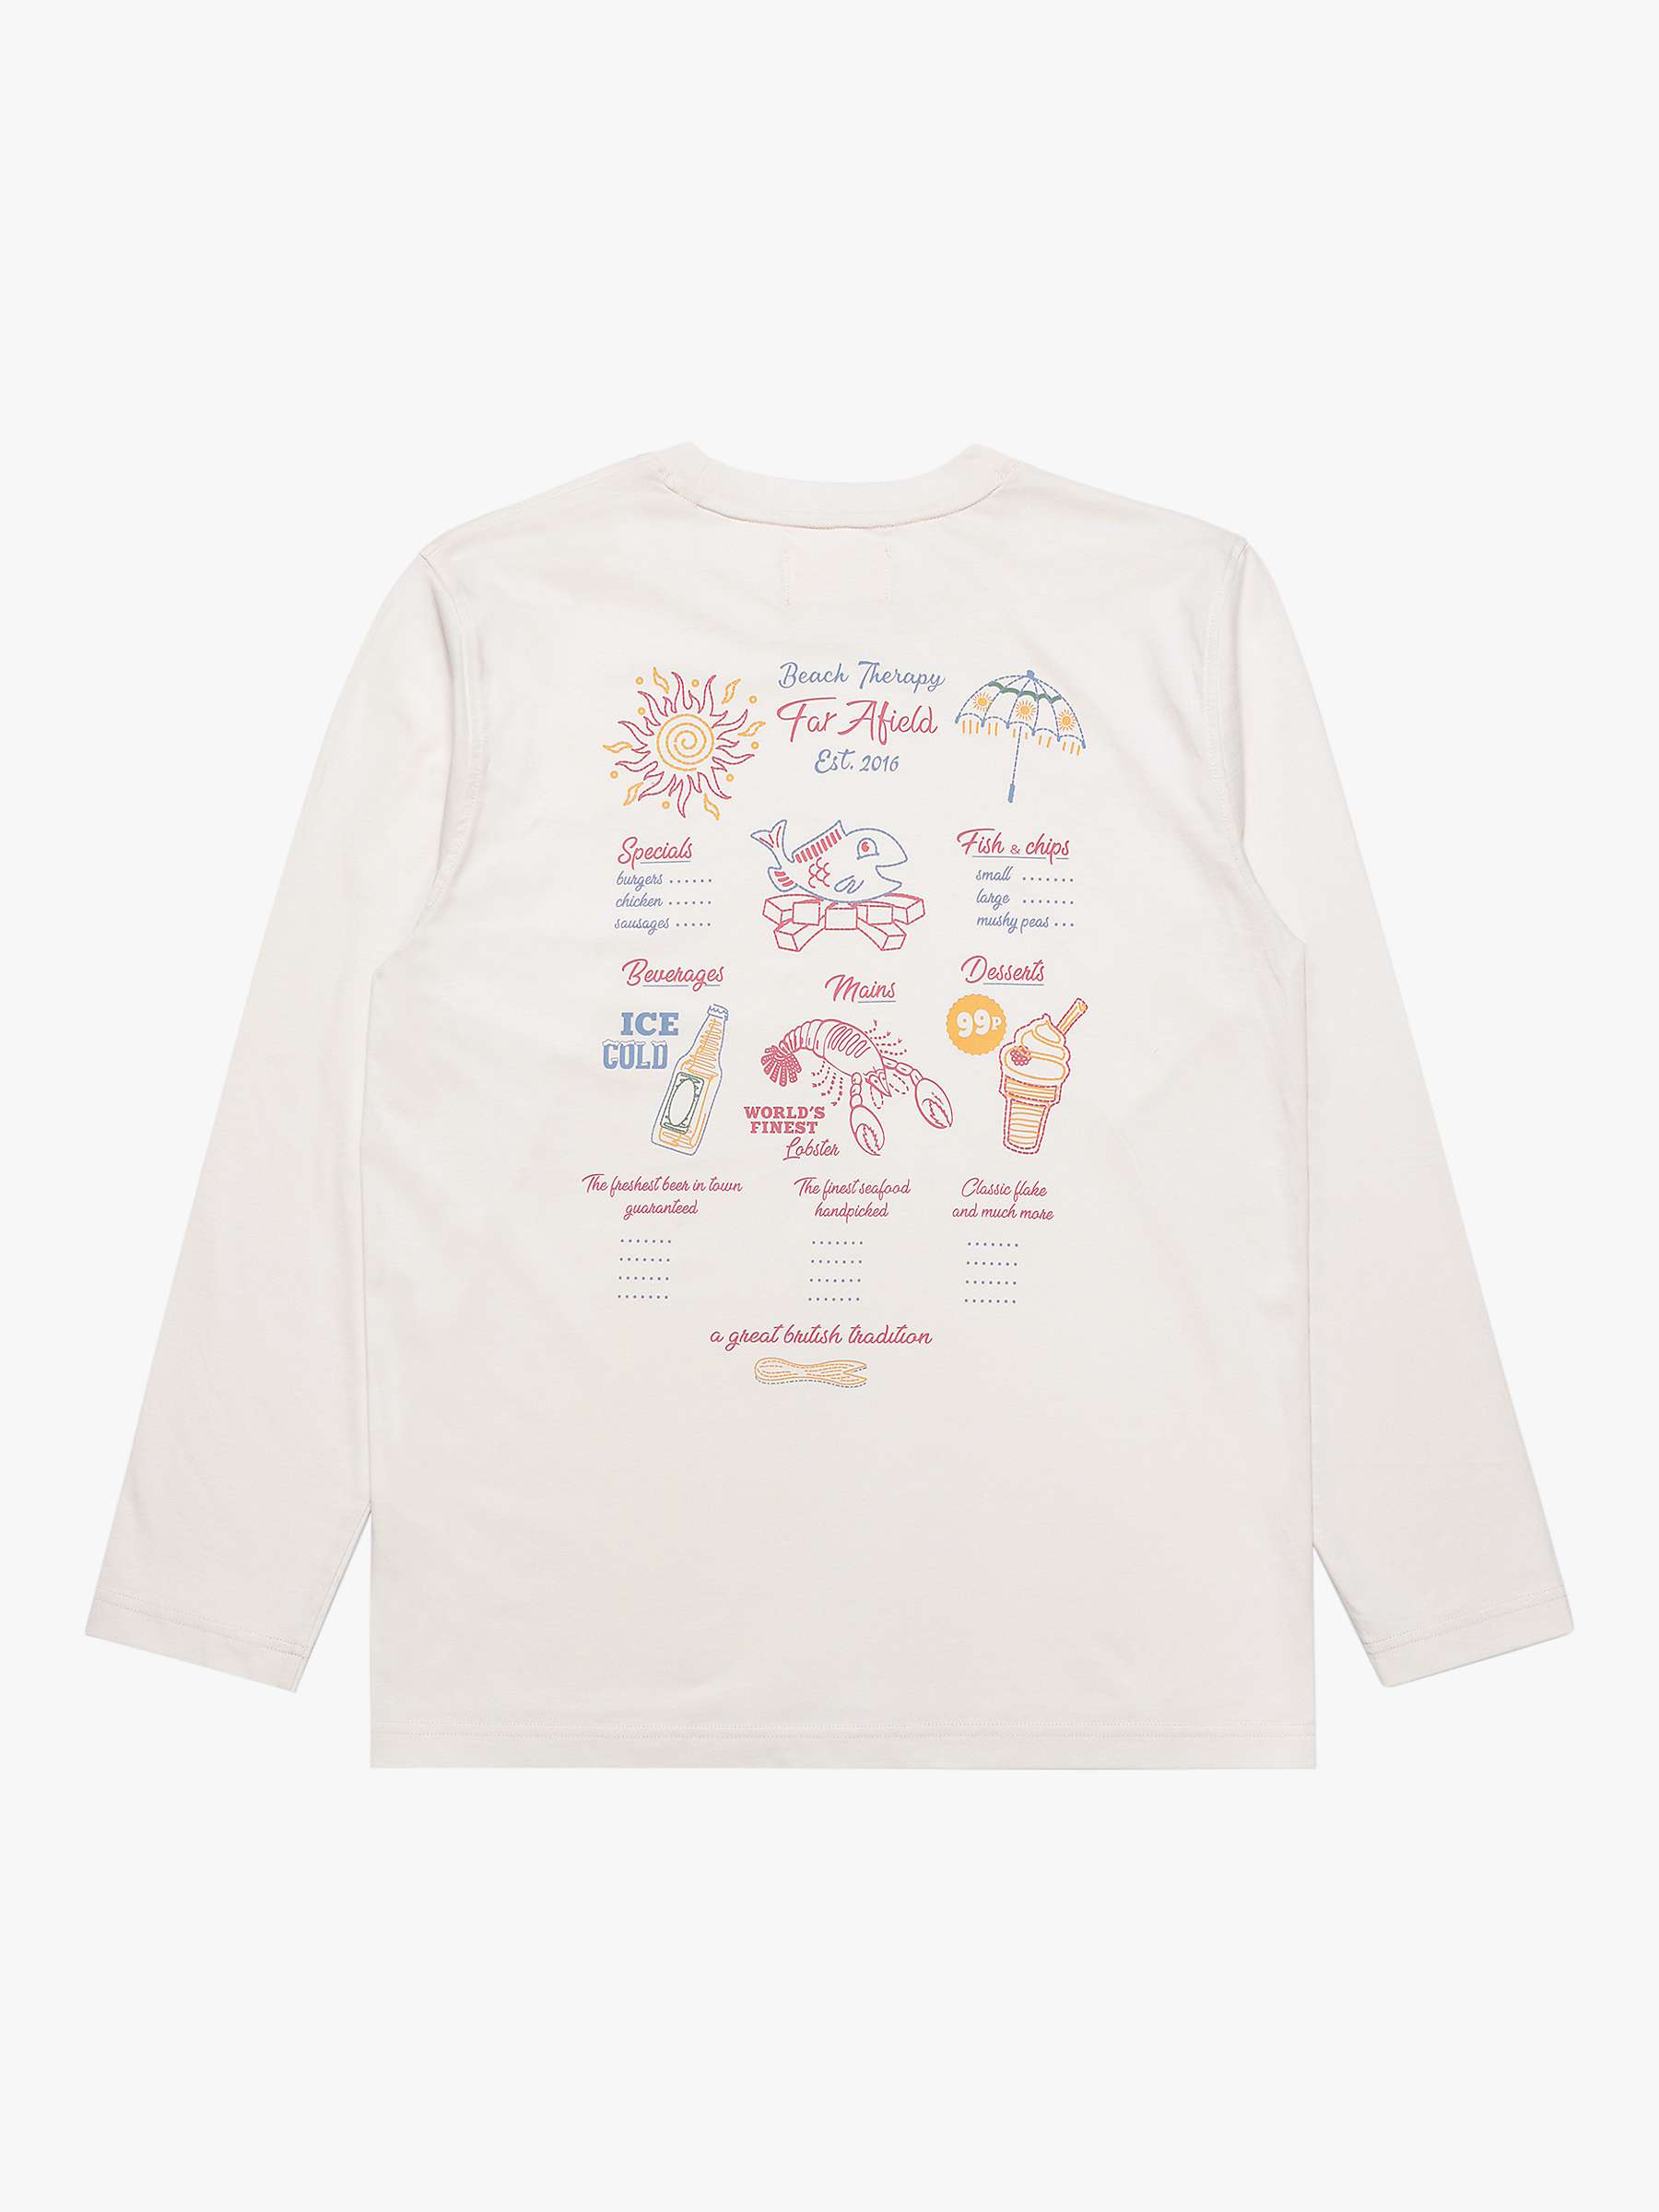 Buy Far Afield Long Sleeve Graphic Print T-Shirt, White Online at johnlewis.com